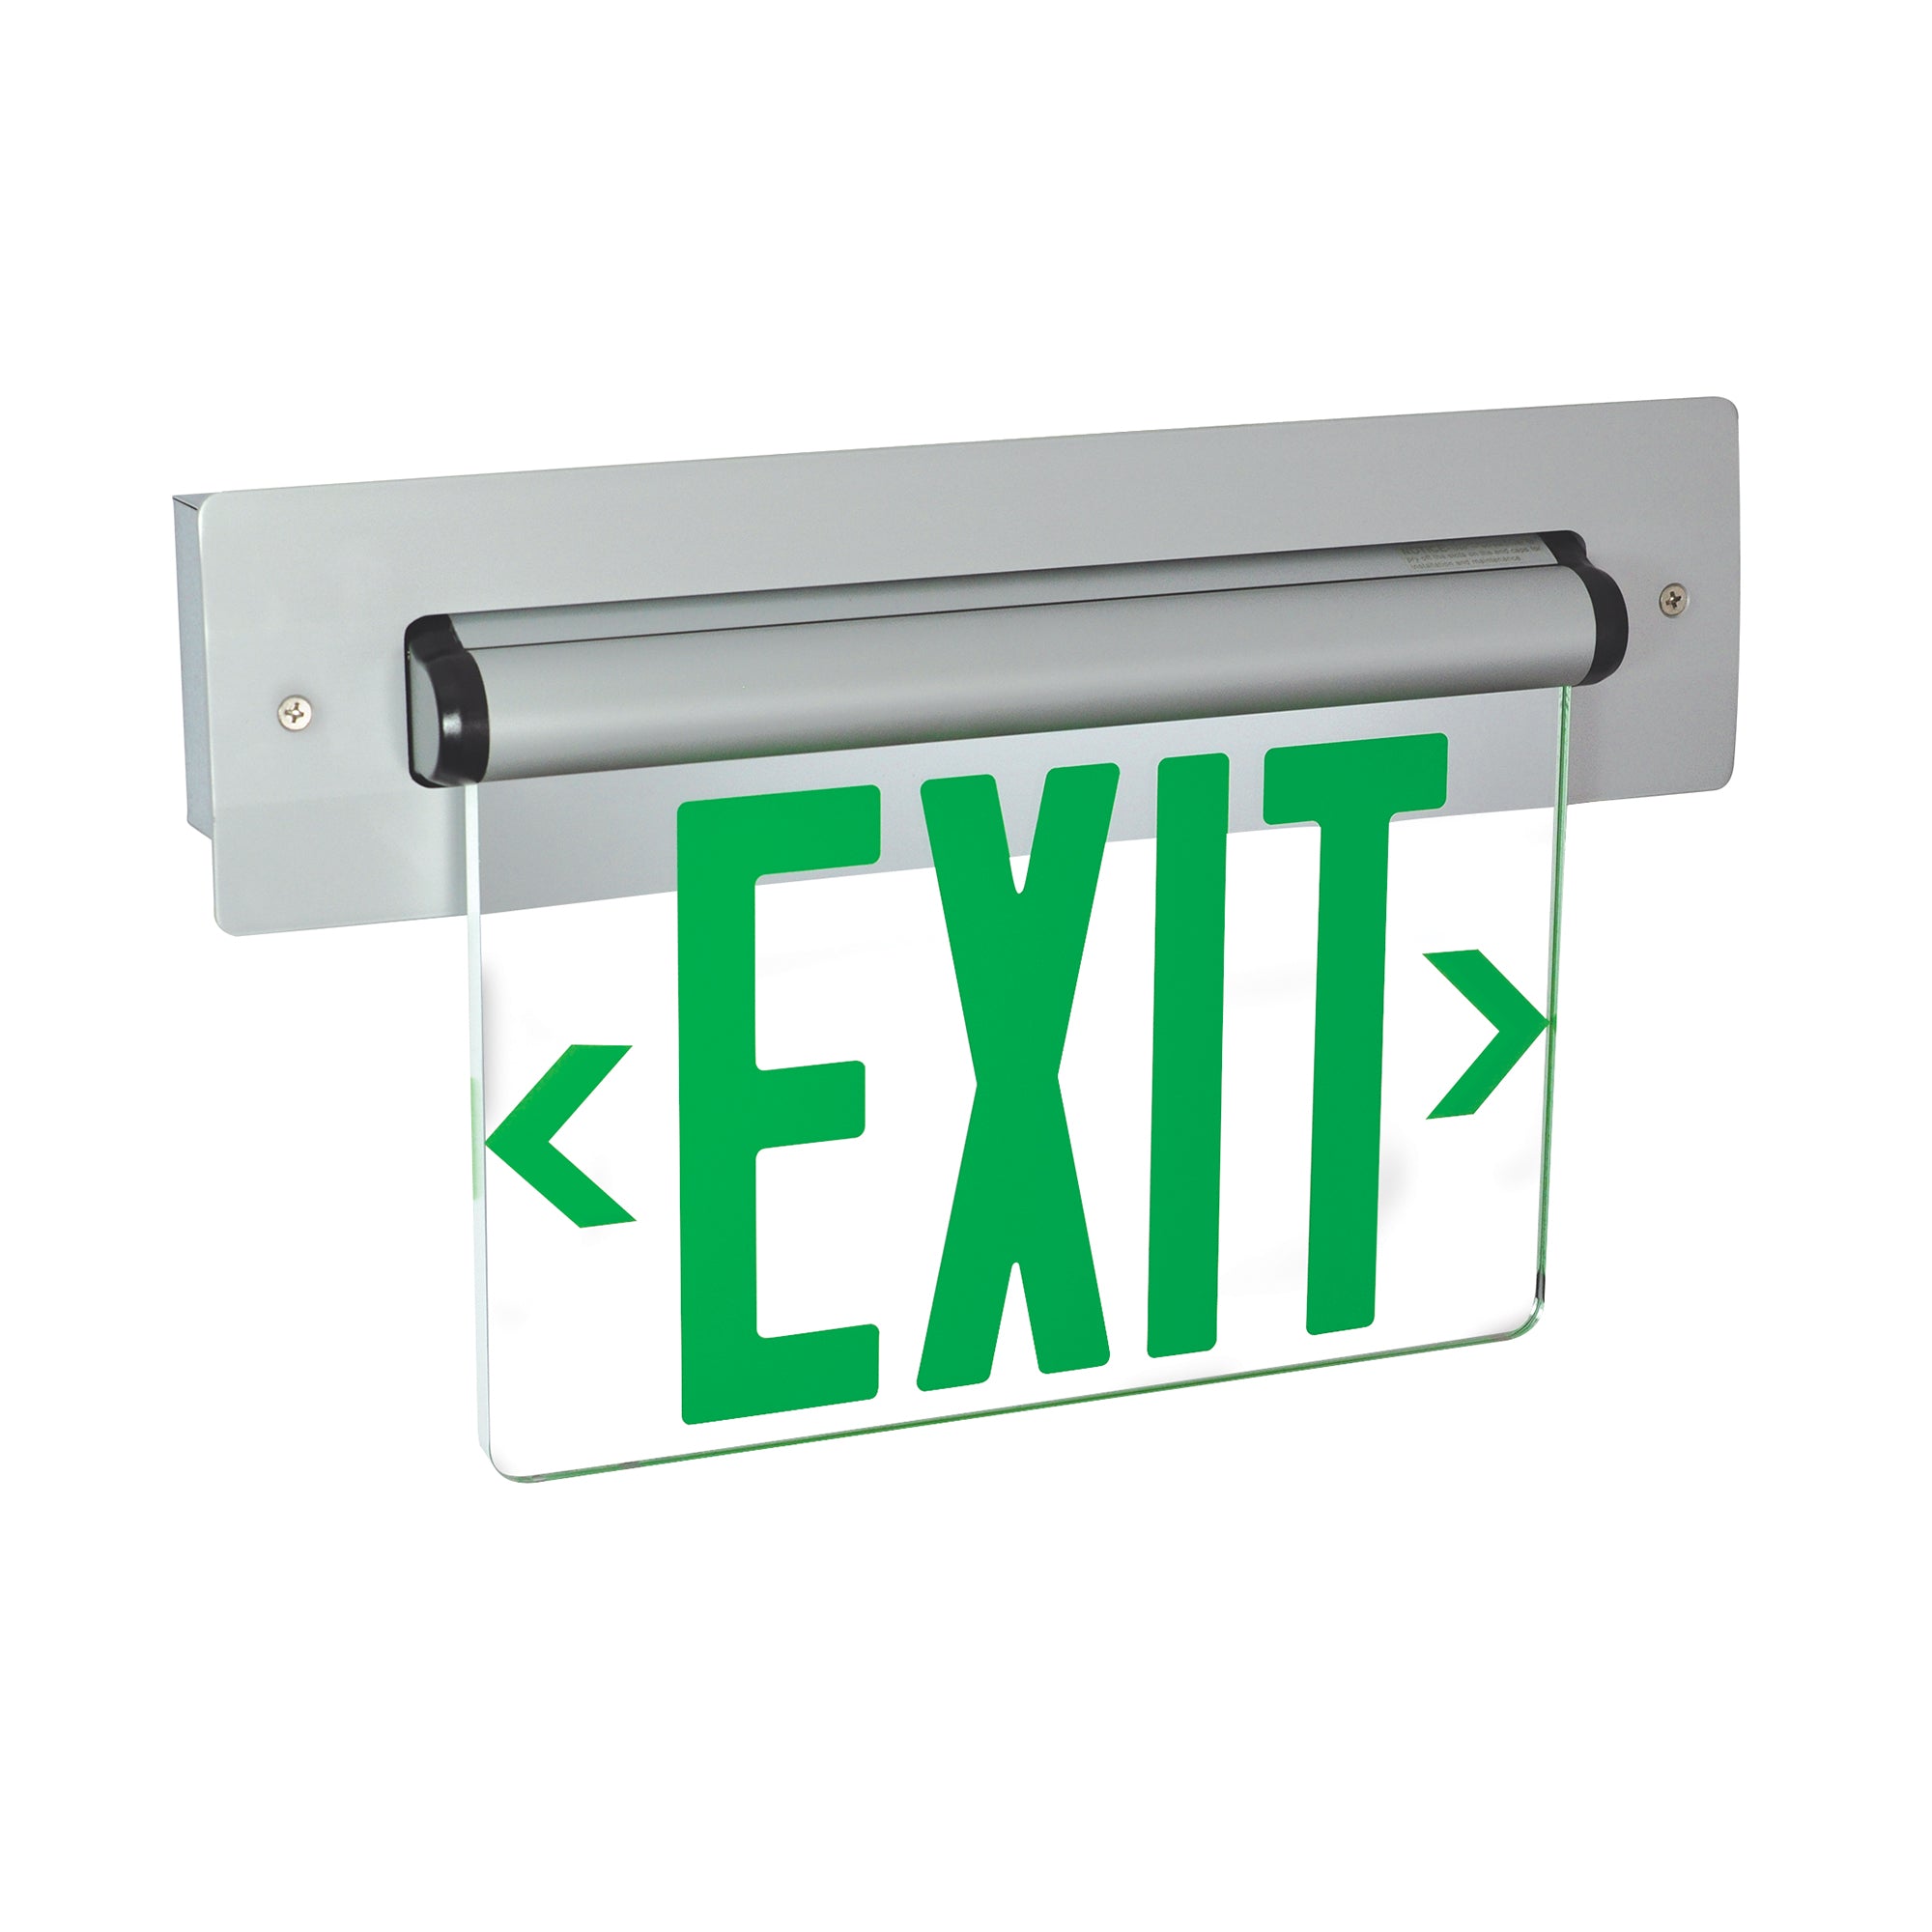 Nora Lighting NX-814-LEDGCA - Exit / Emergency - Recessed Adjustable LED Edge-Lit Exit Sign, 2 Circuit, 6 Inch Green Letters, Single Face / Clear Acrylic, Aluminum Housing